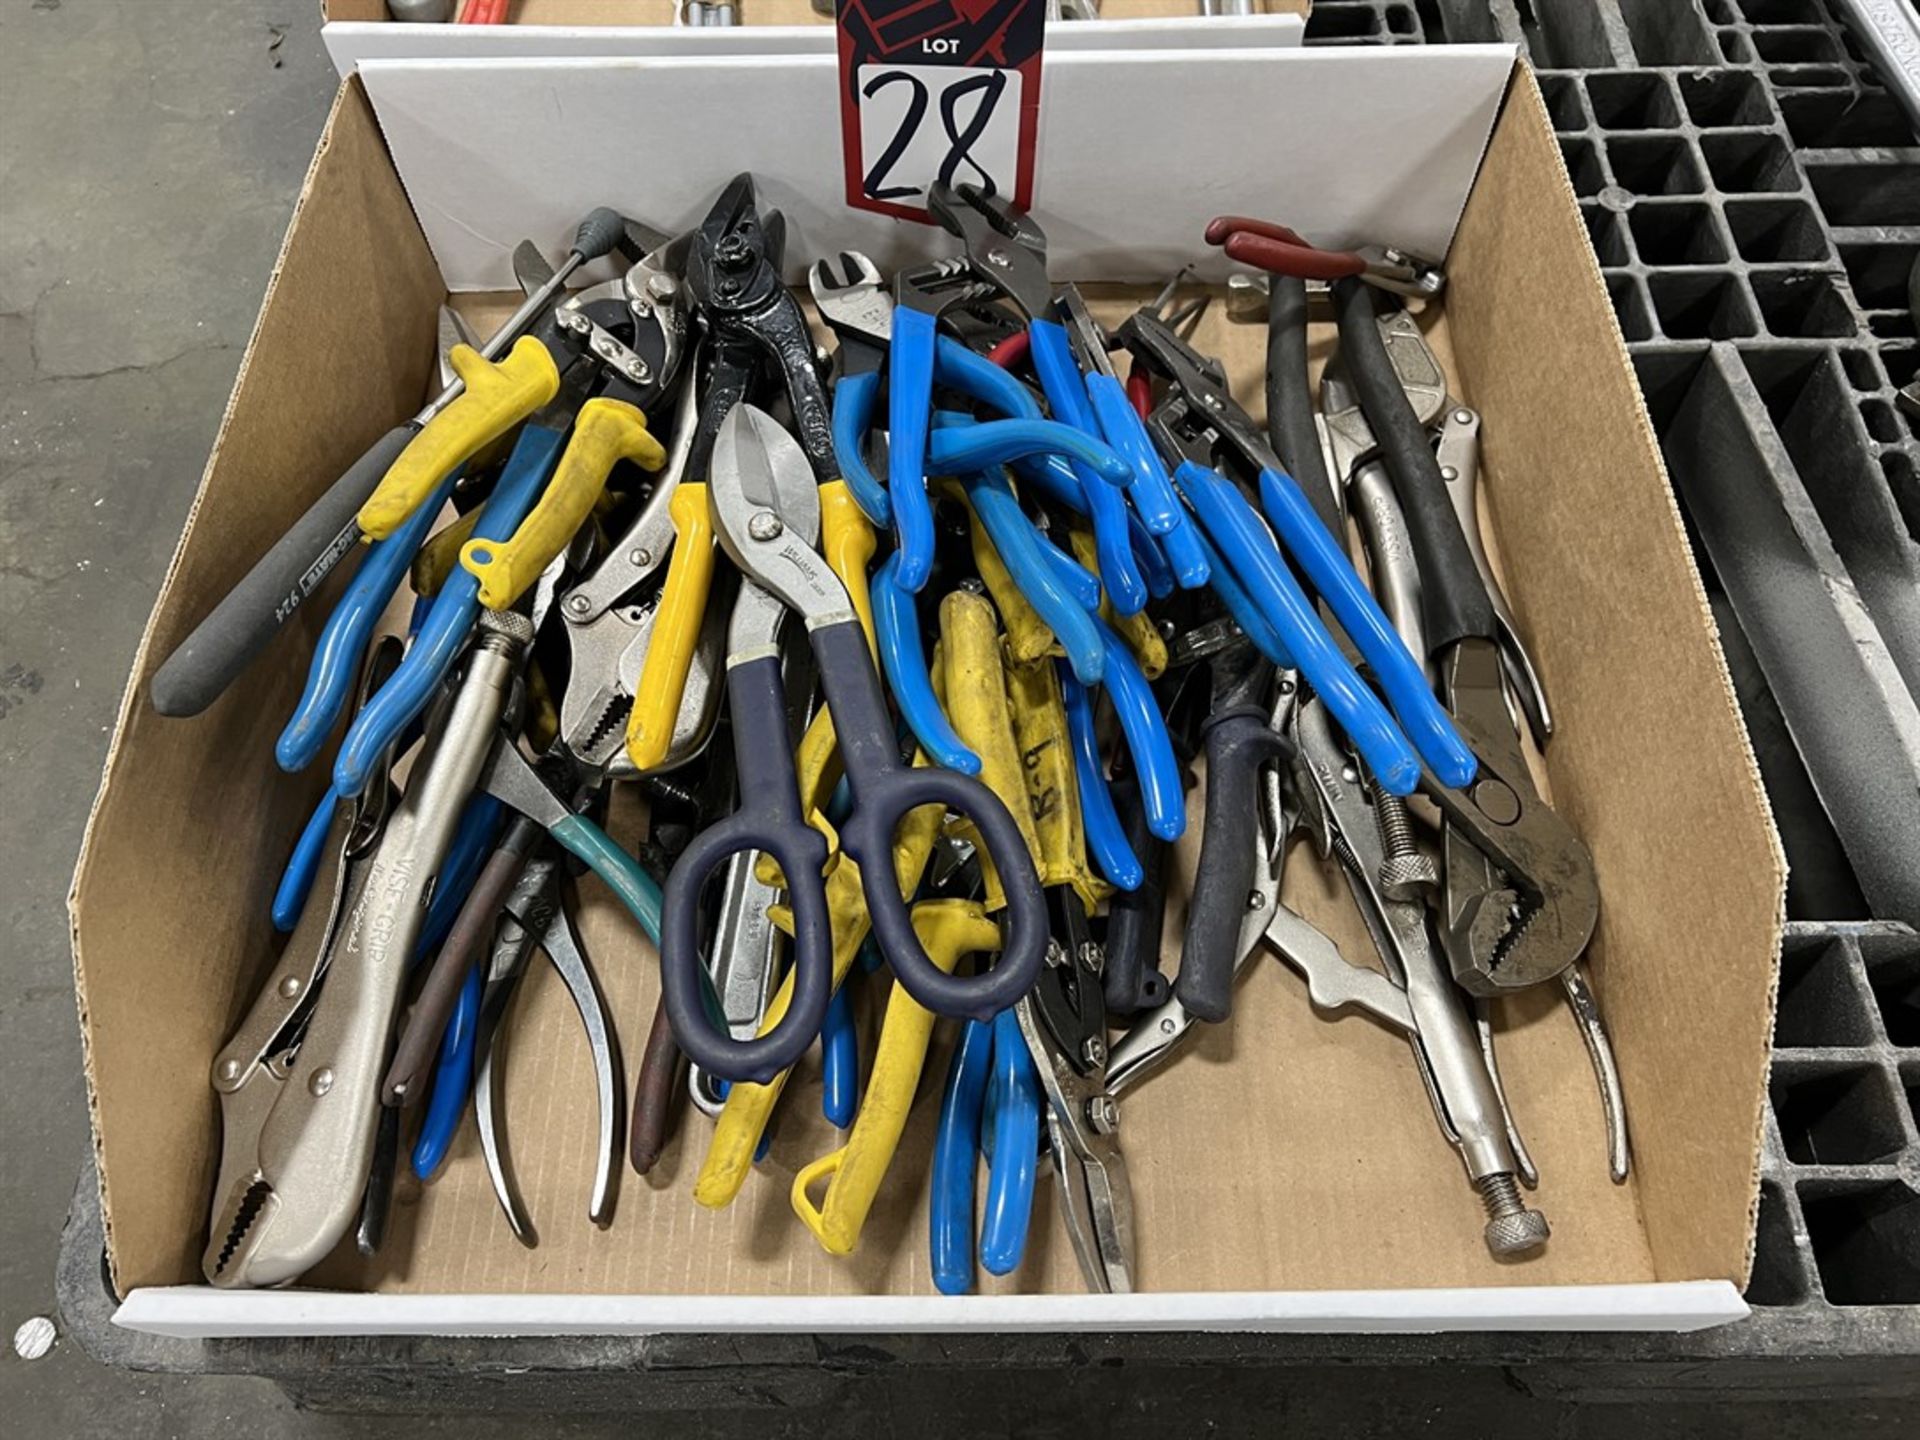 Lot of Assorted Snips, Channel Locks, Wire Cutters, and Vise Grips